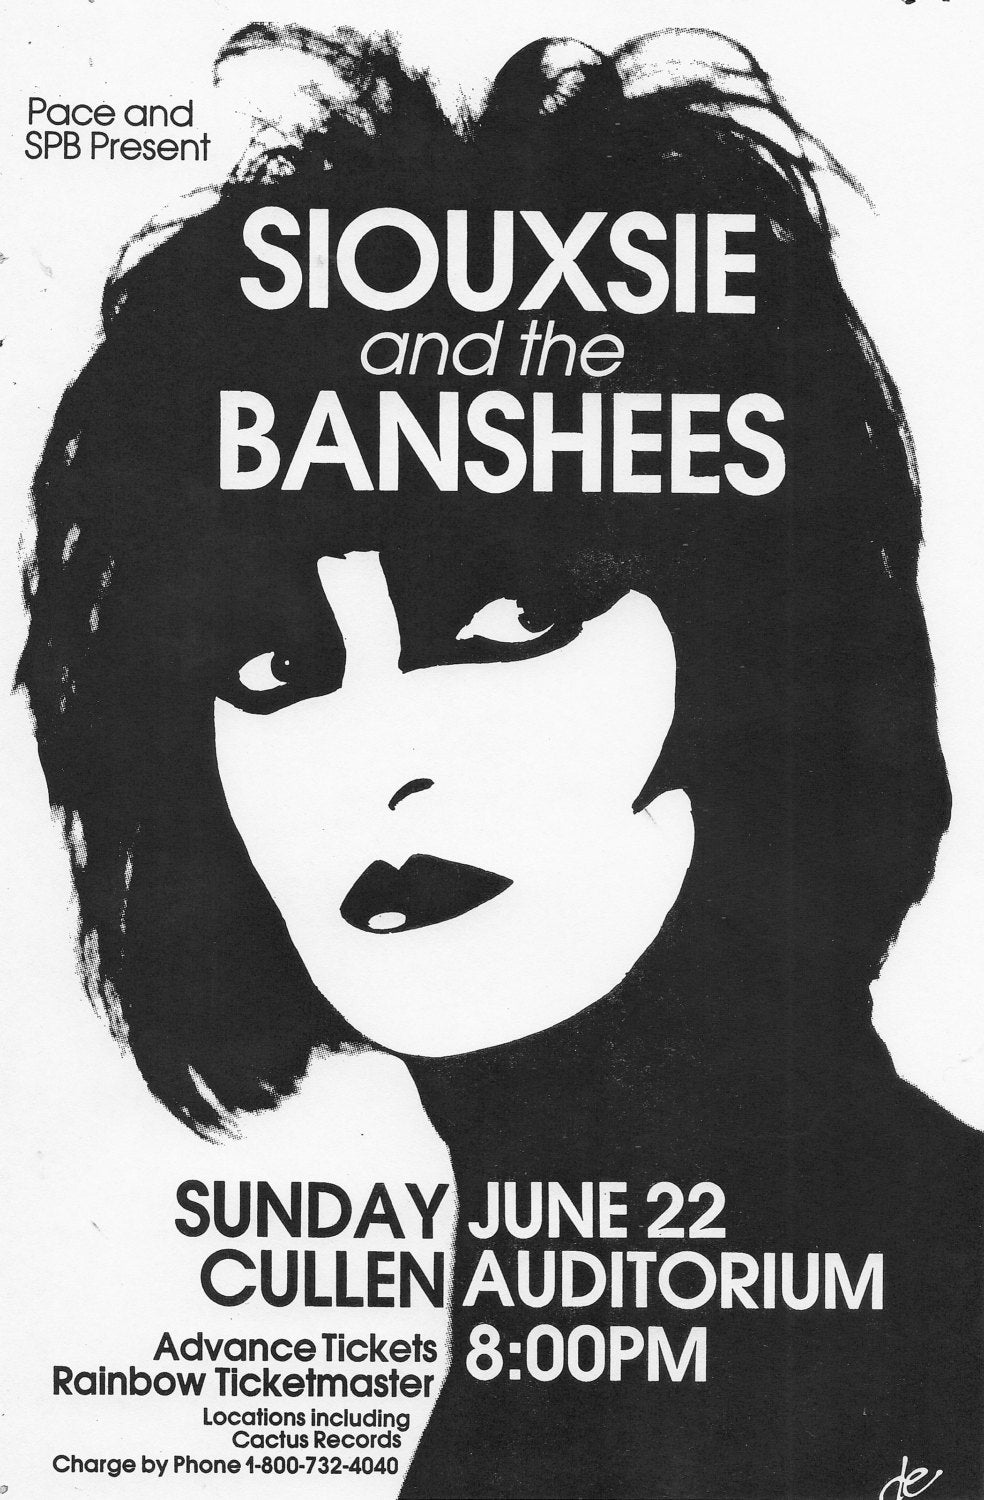 Vintage Music Art Poster - Siouxsie And The Banshees - Cullen Auditorium  0512